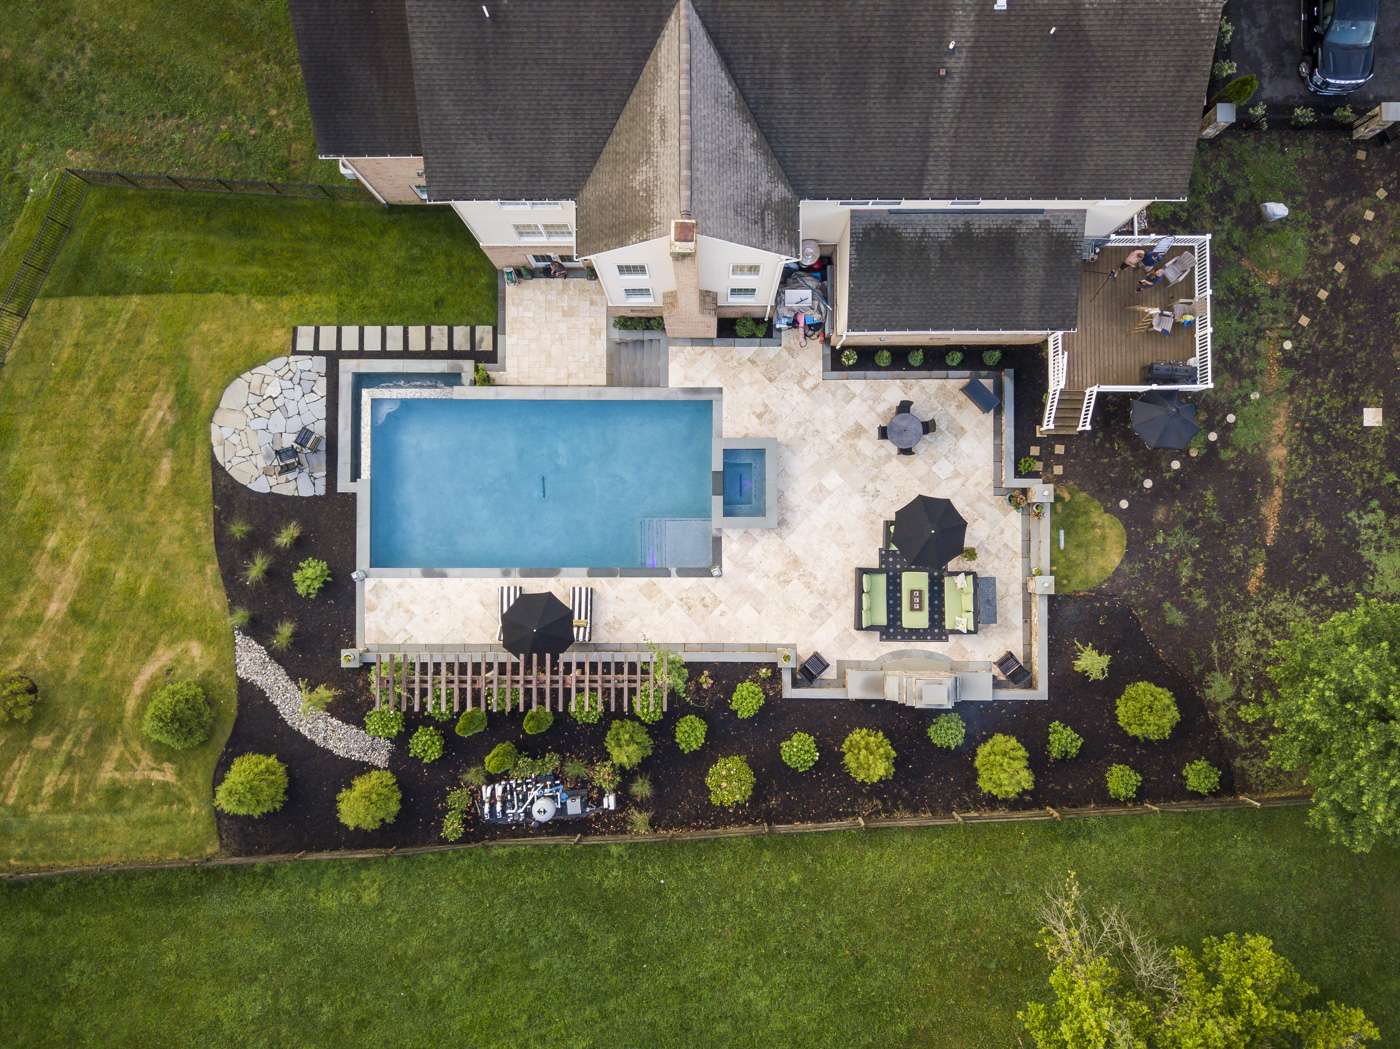 aerial view of pool with paver patio